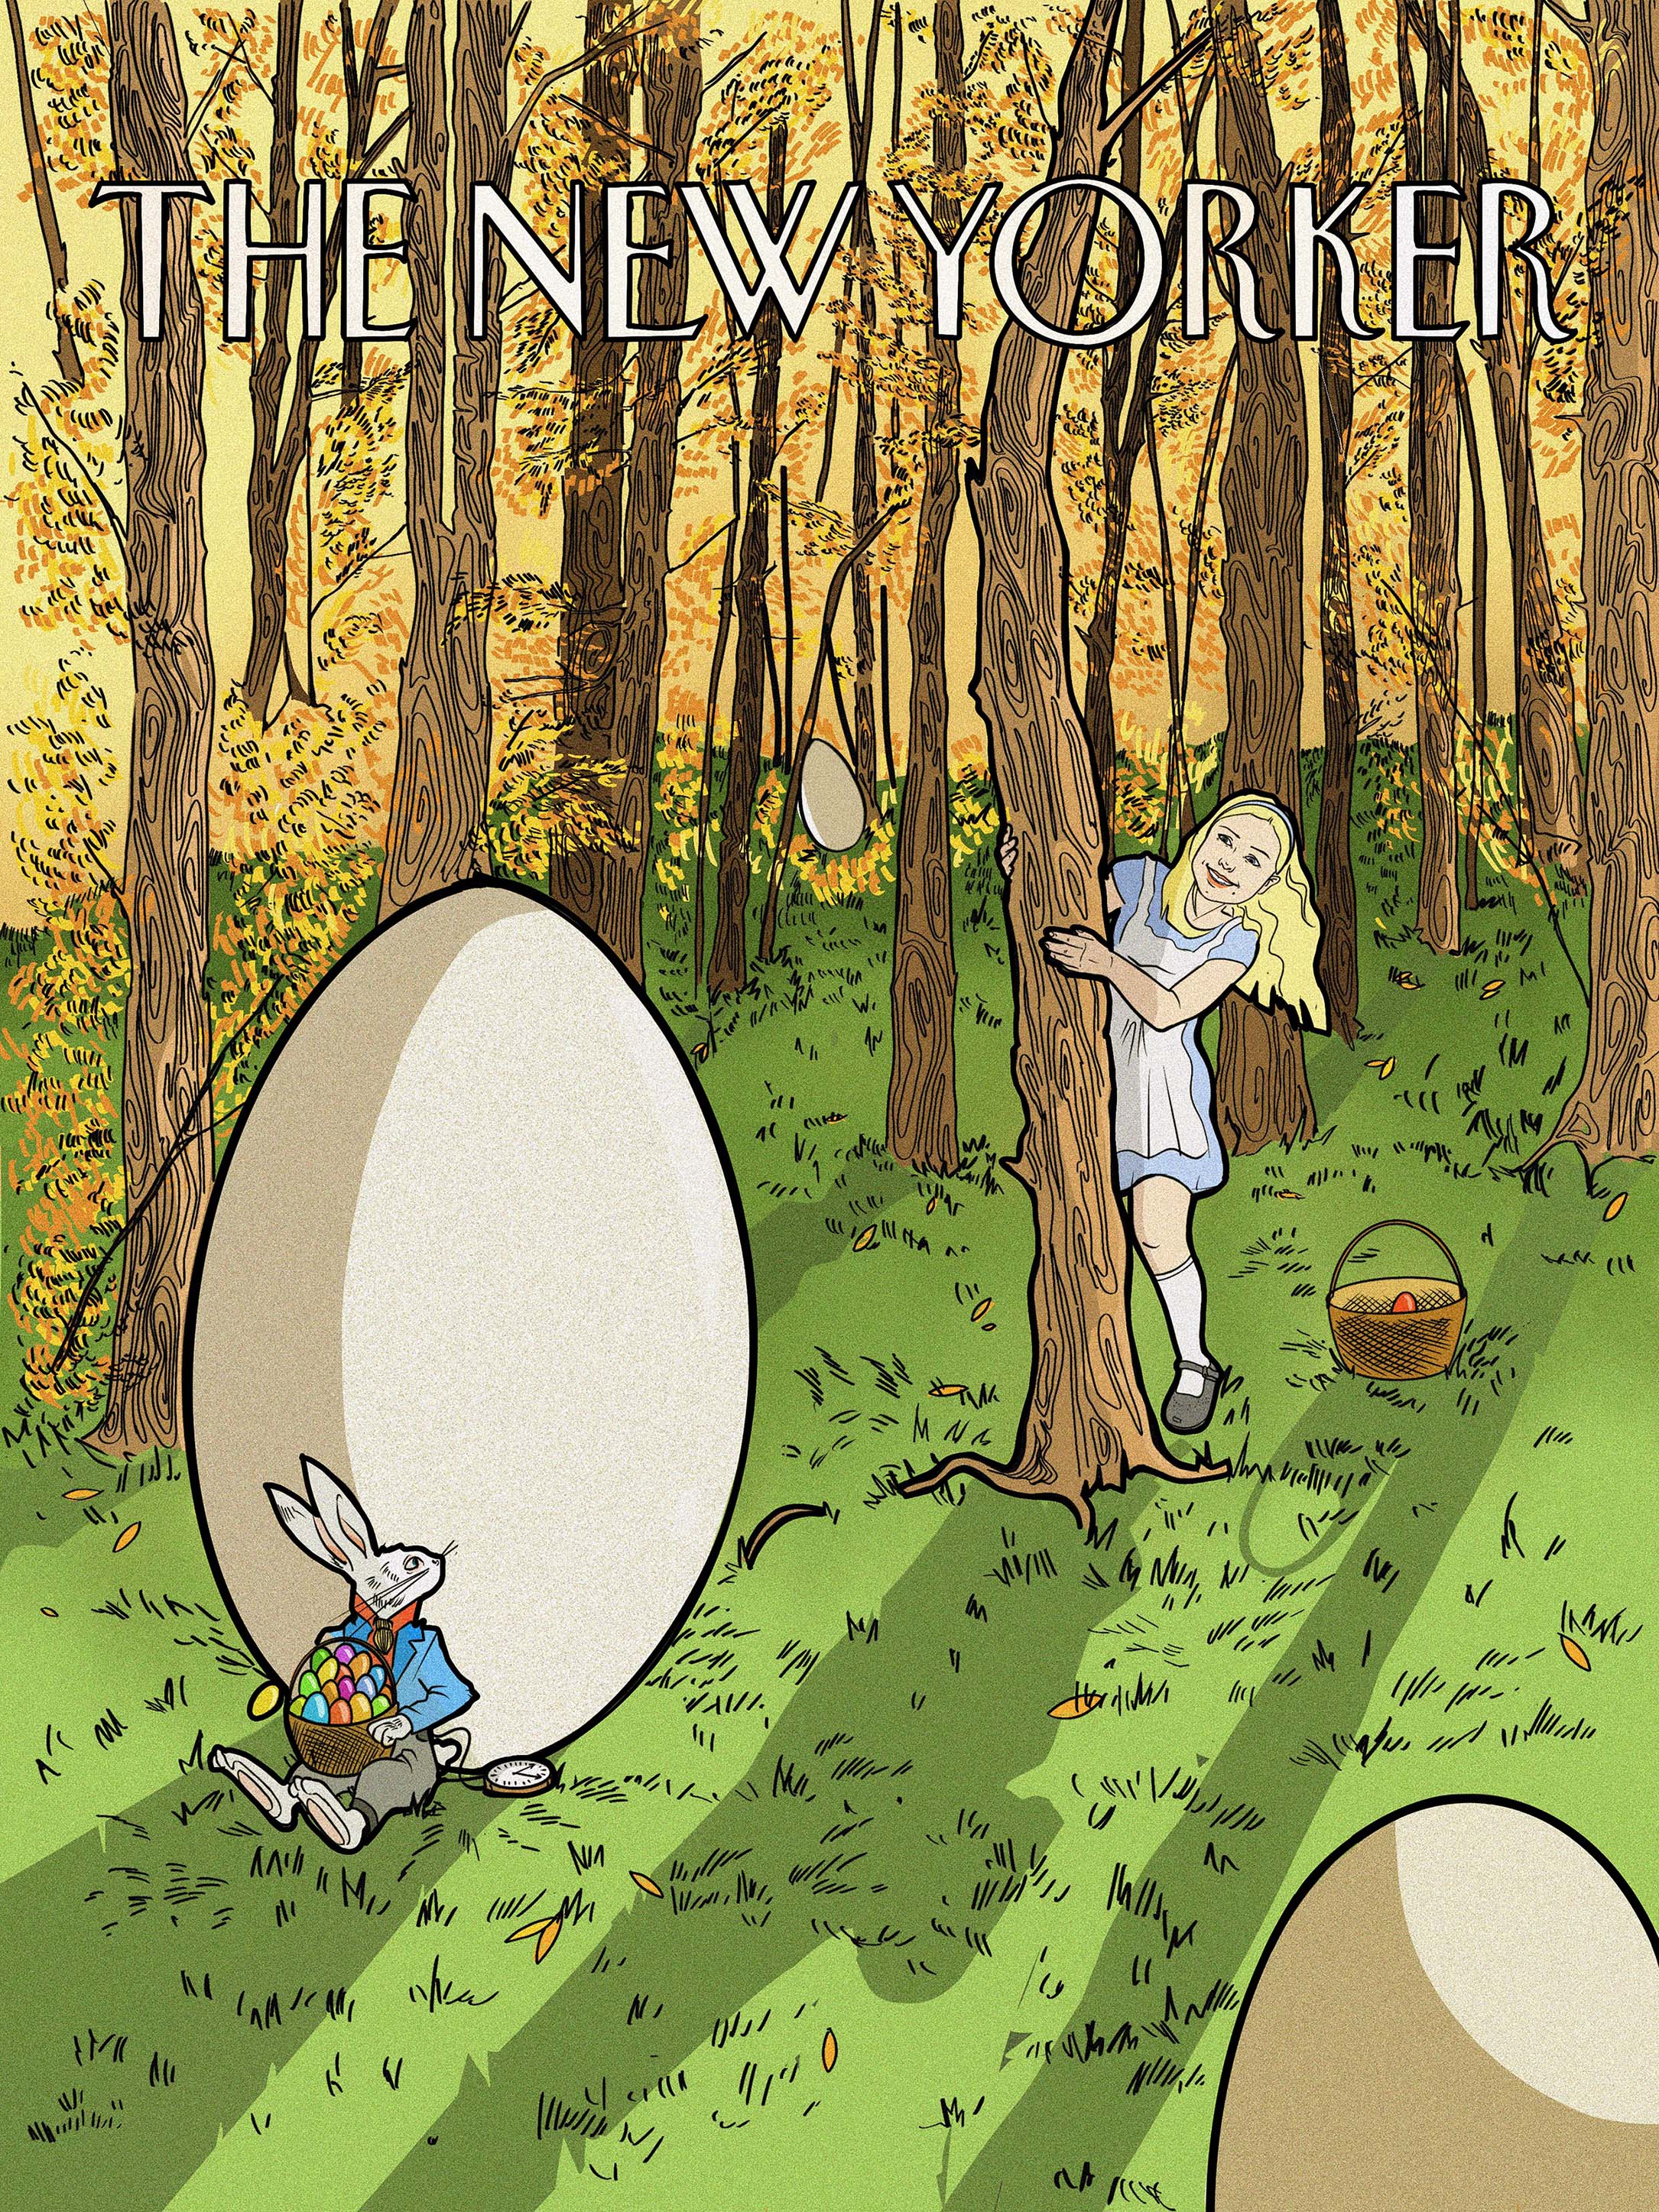 BA Illustration Art work by Catherine Perkins illustrating a speculative front cover for The New Yorker magazine translating Easter holidays. A young girl hides behind a tree trunk in a forest, peering around at the giant easter egg in front of her, which has a white bunny sat in front. A play on Alice in Wonderland.